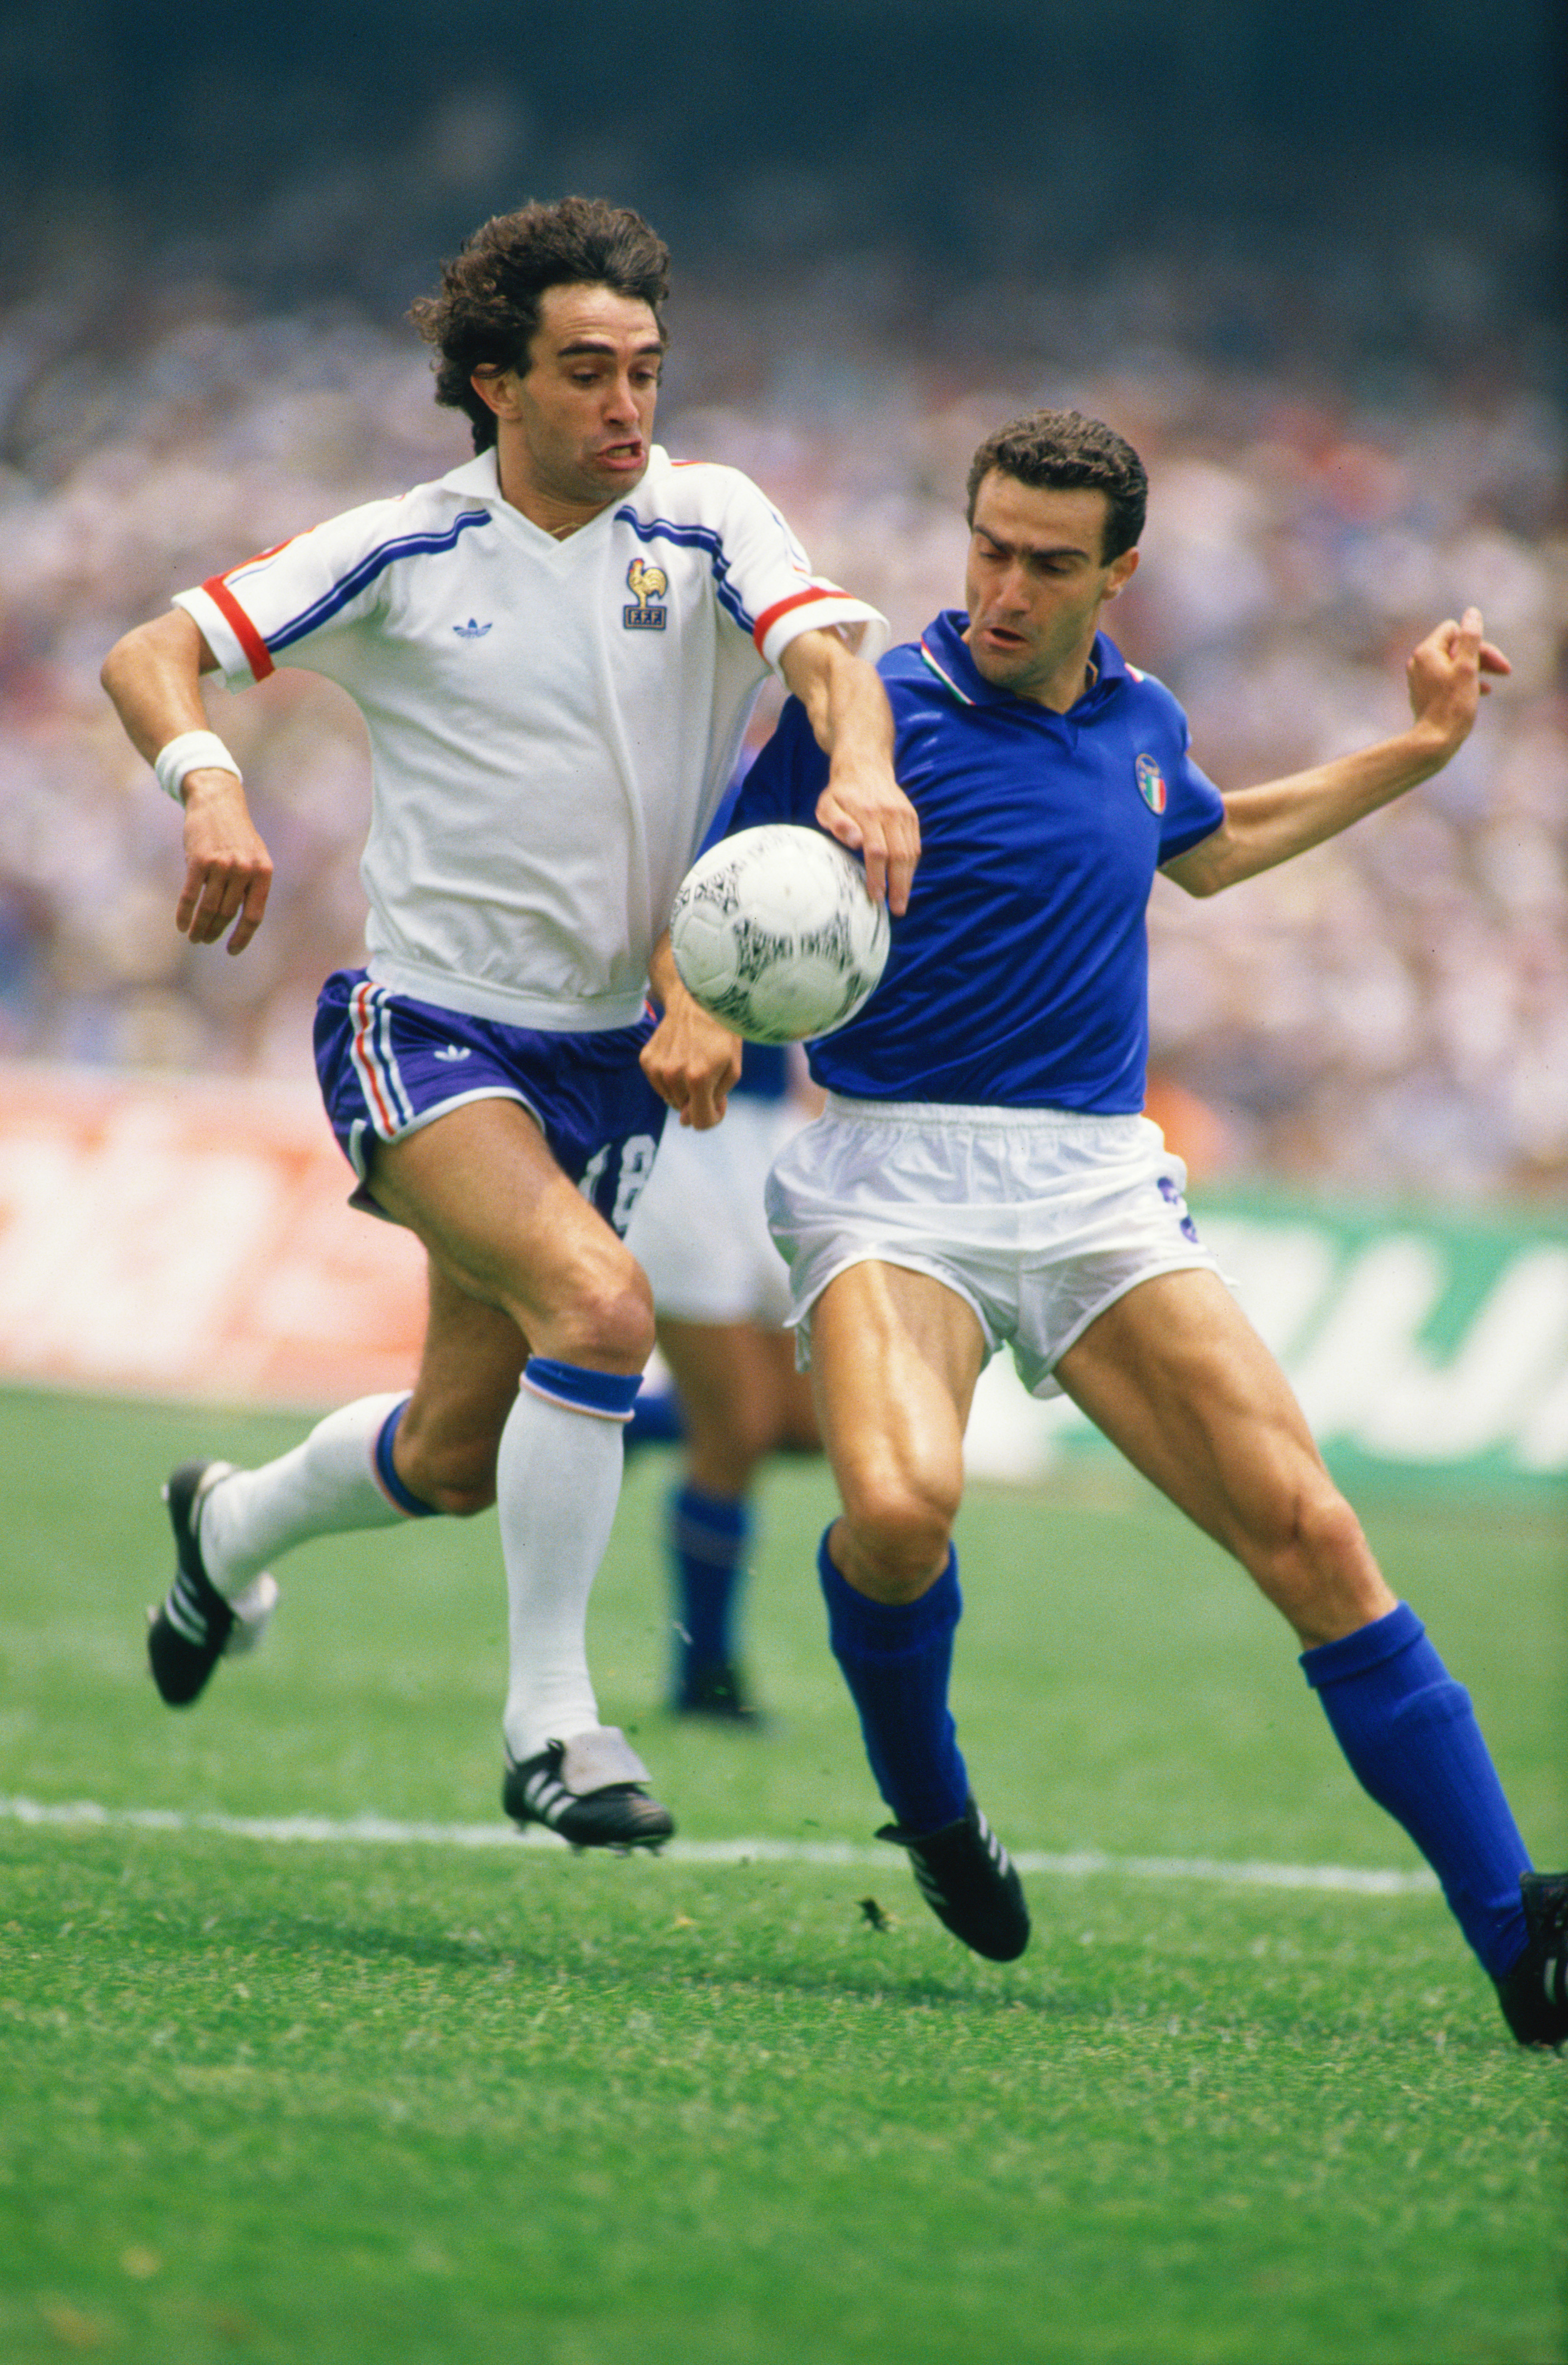 17 Jun 1986:  Dominique Rocheteau of France takes on Guiseppe Bergomi of Italy during the World Cup match in Mexico City. France won the match 2-0. \ Mandatory Credit: David  Cannon/Allsport